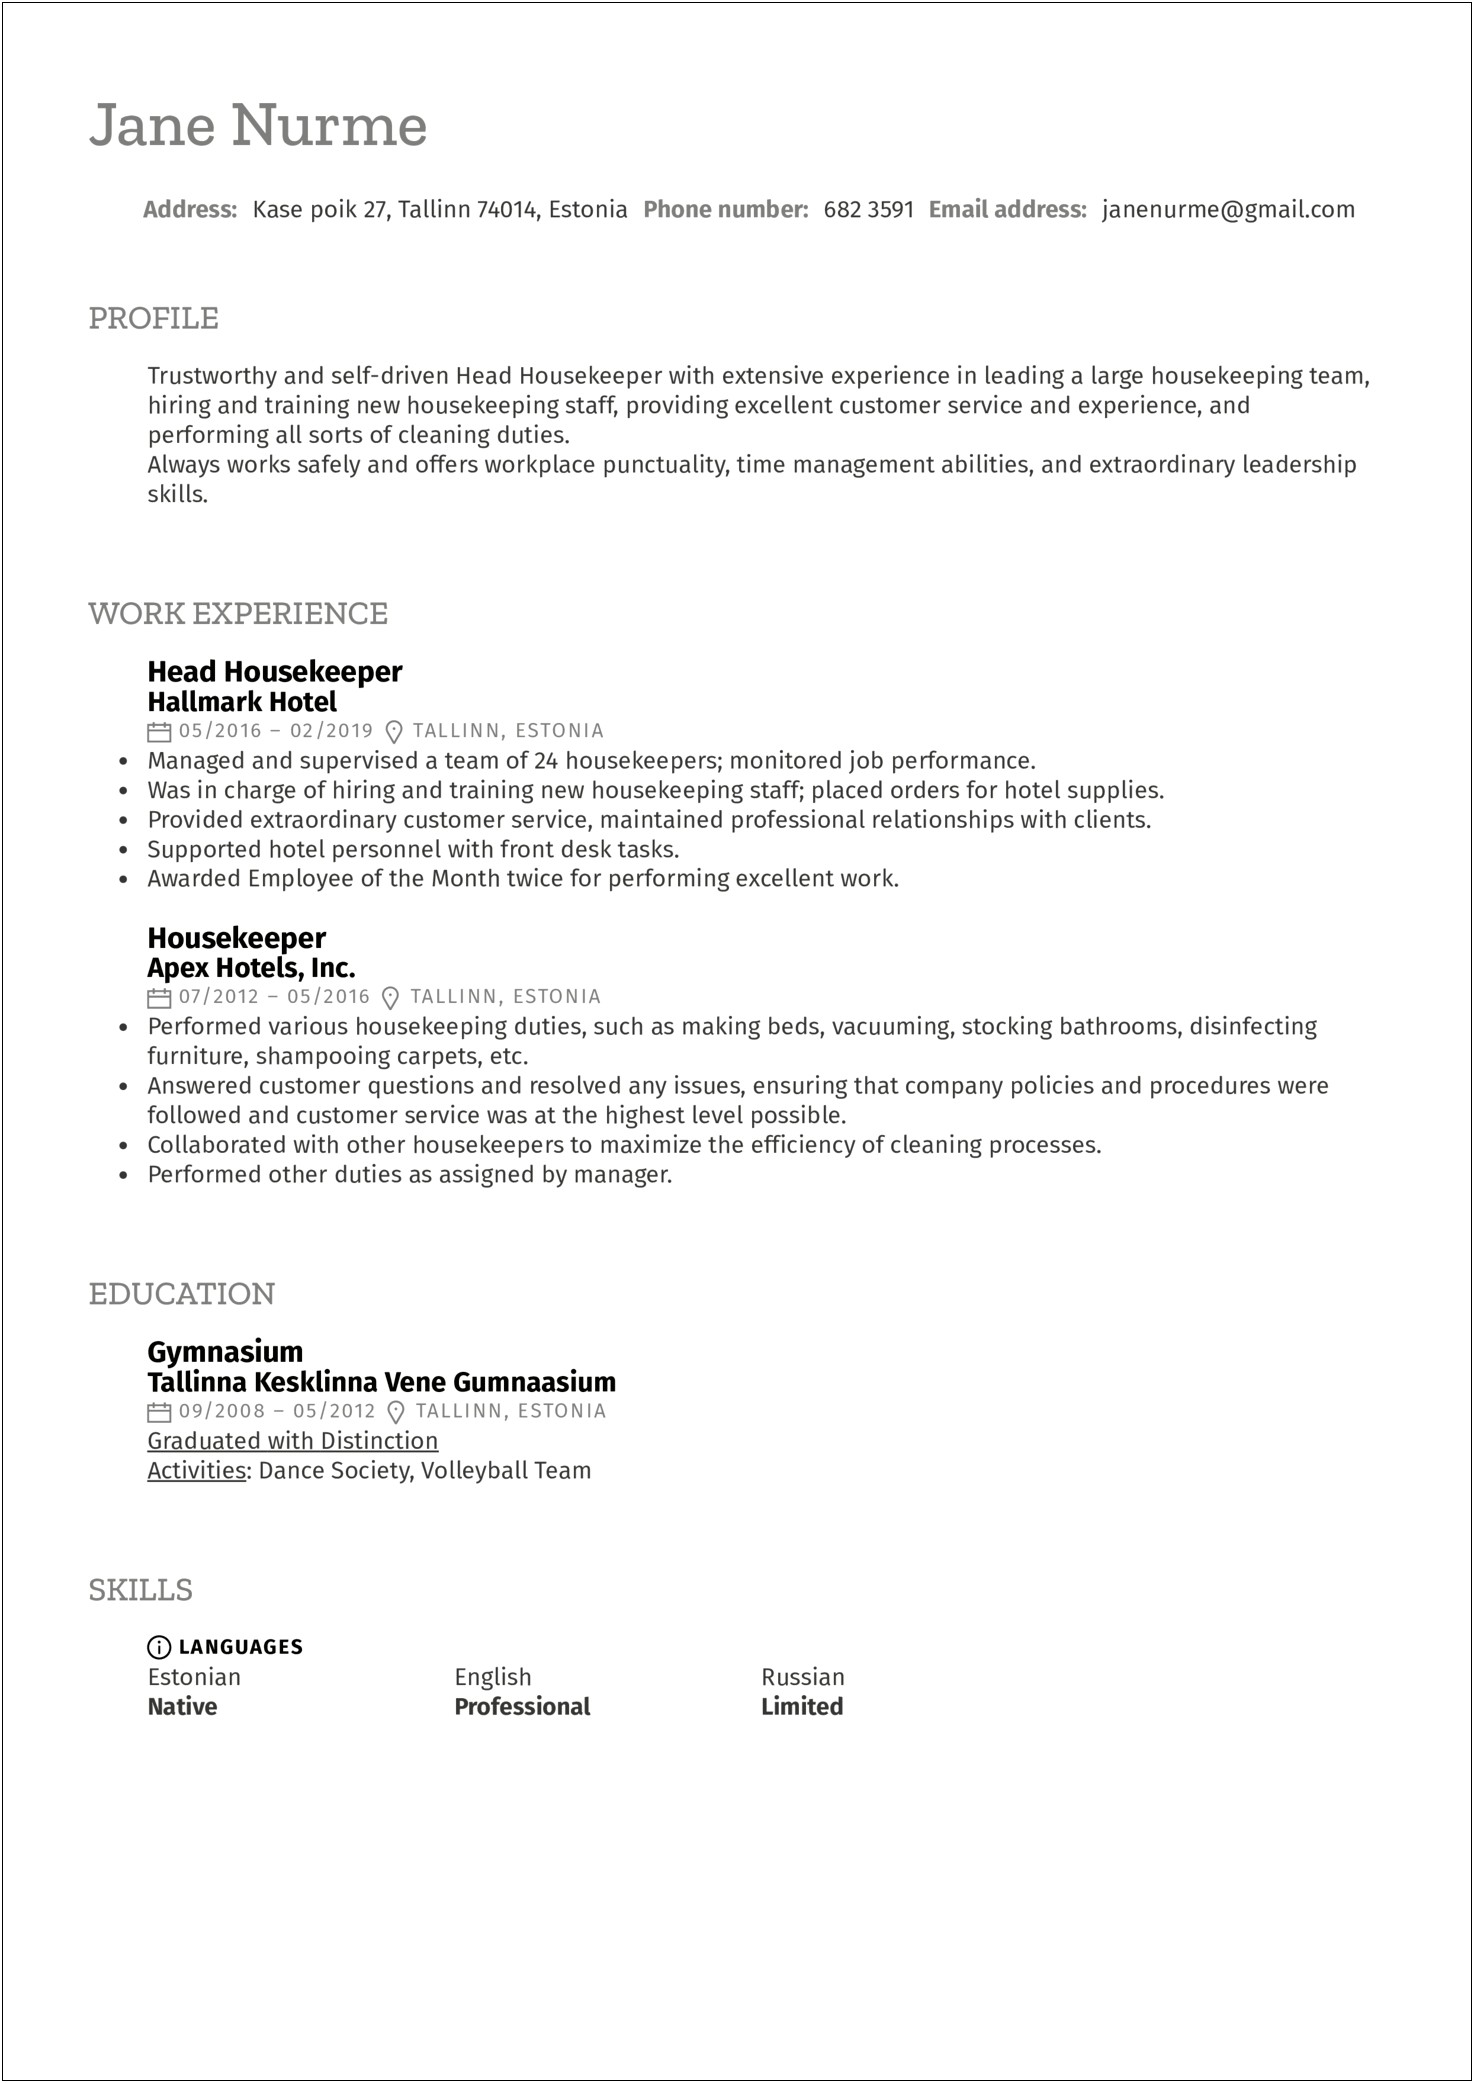 Example Resume For Housekeeping Position